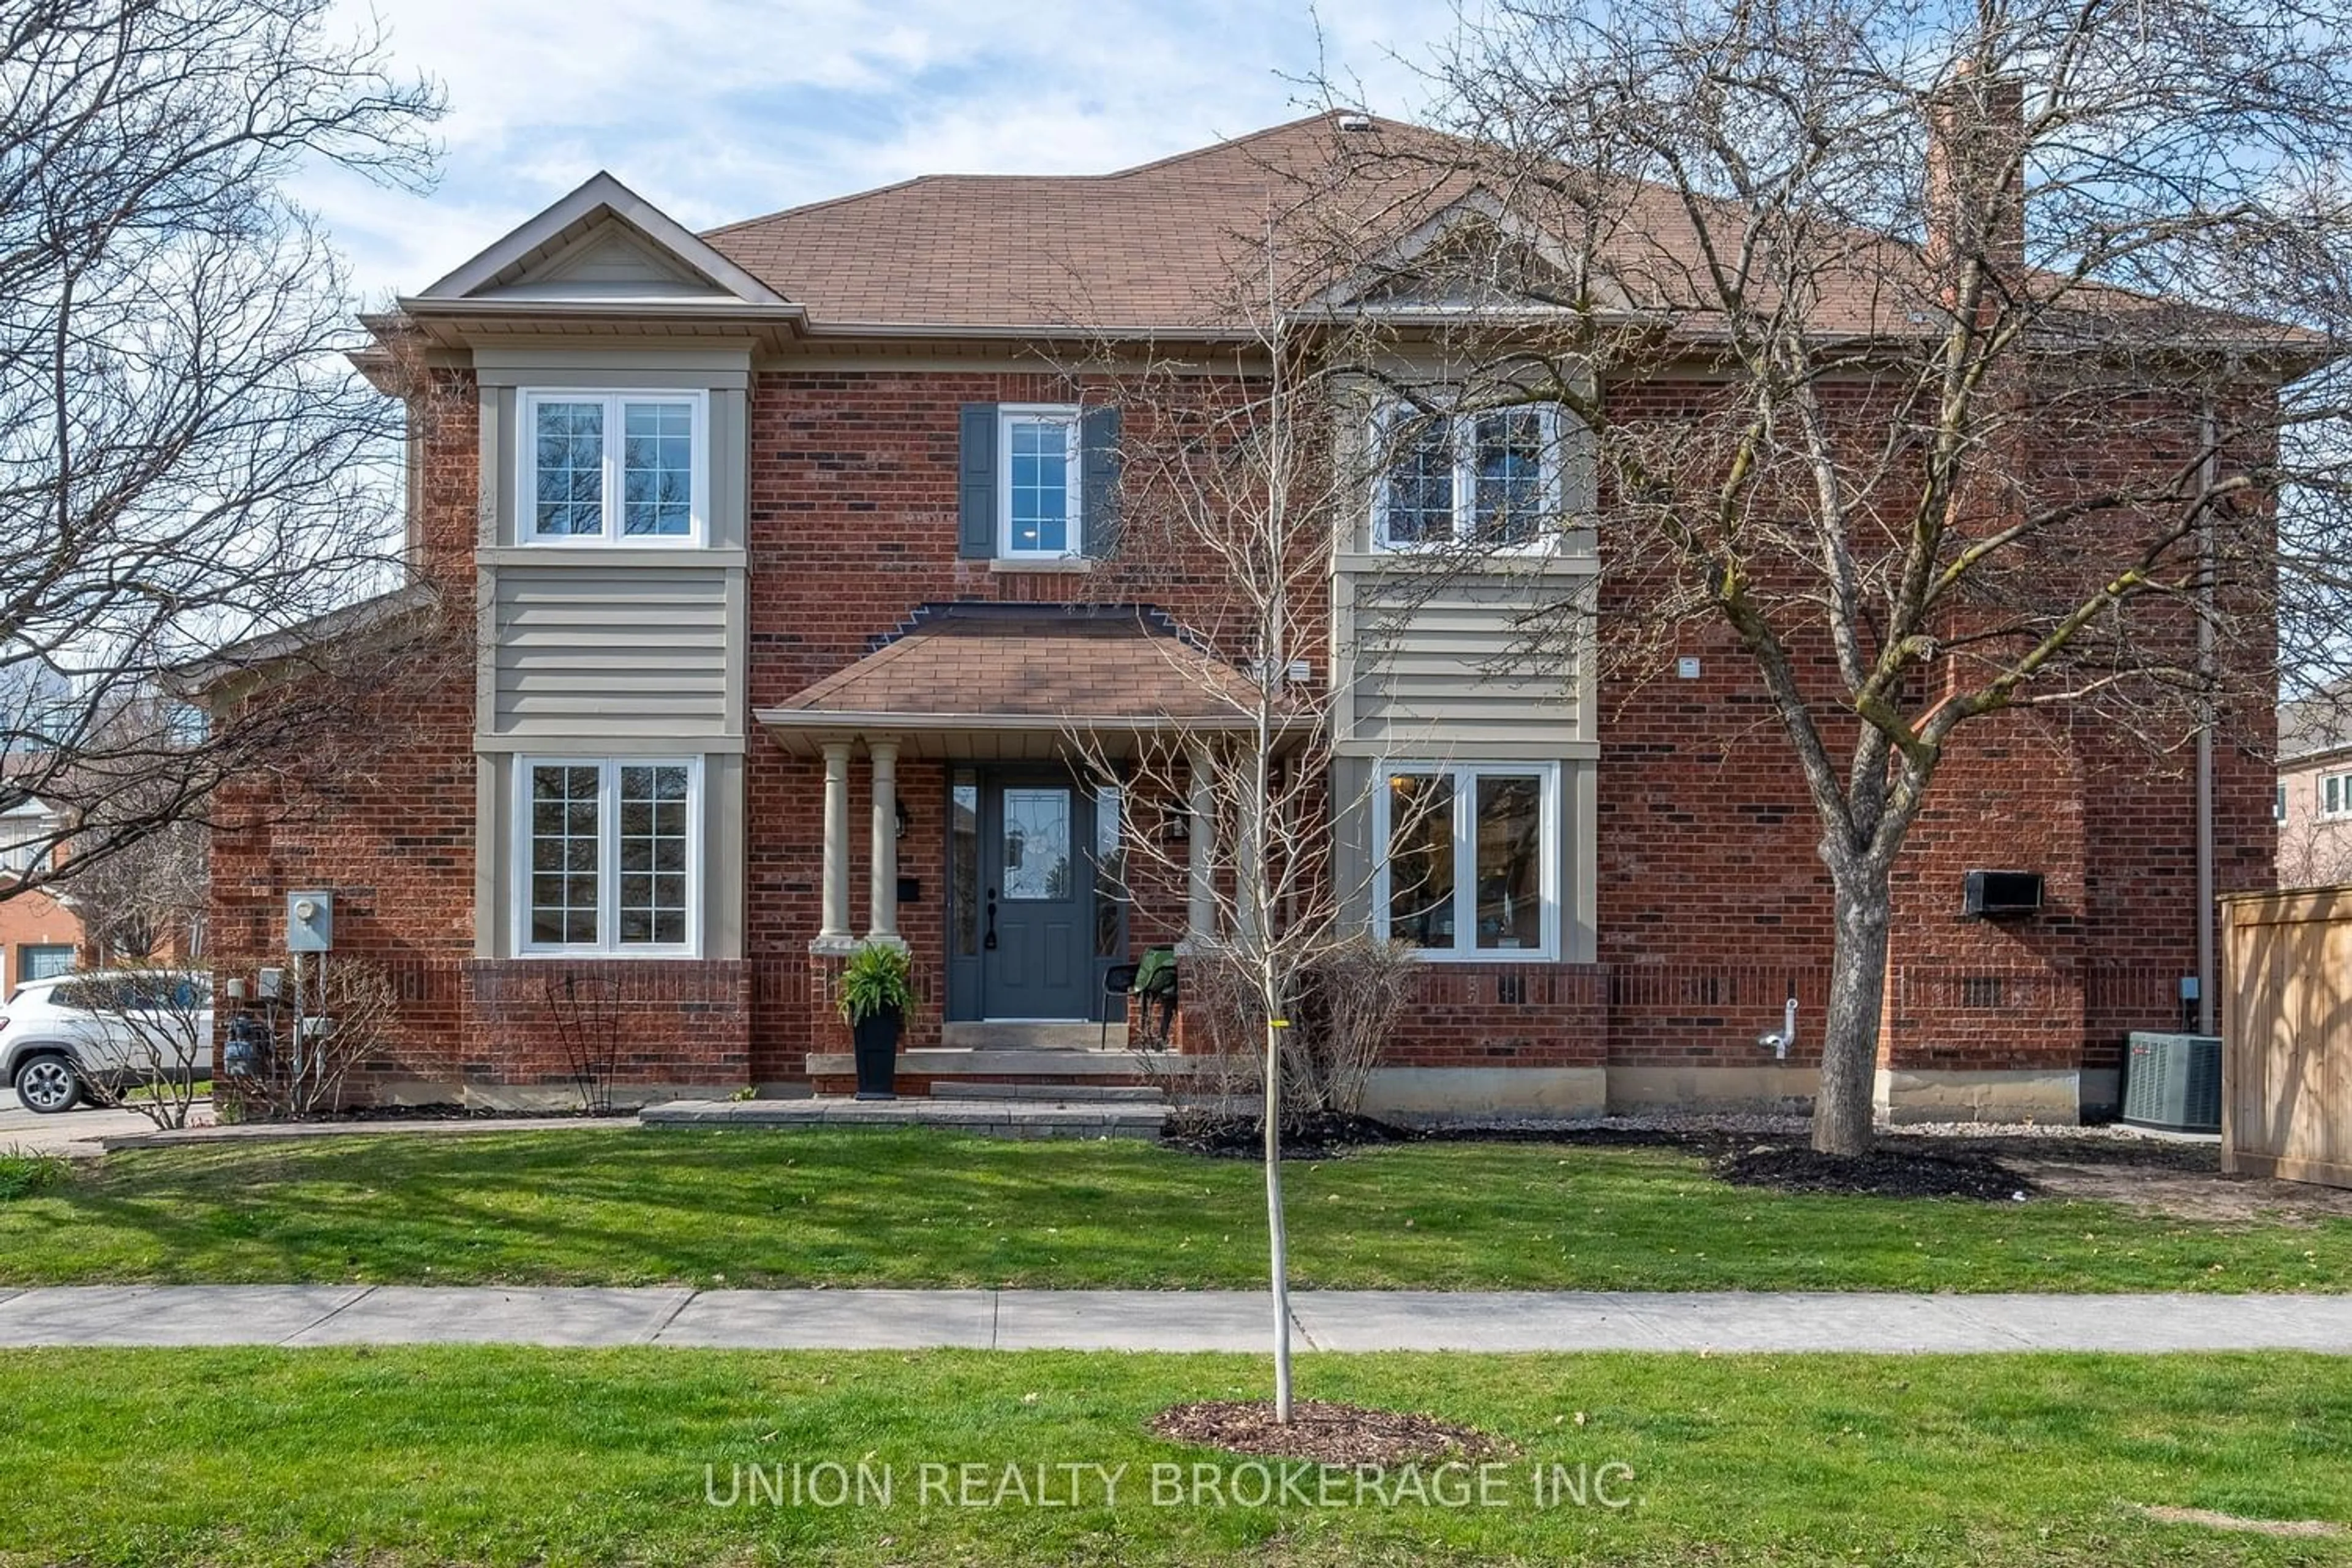 Home with brick exterior material for 2 Mary Gapper Cres #1, Richmond Hill Ontario L4C 0J4